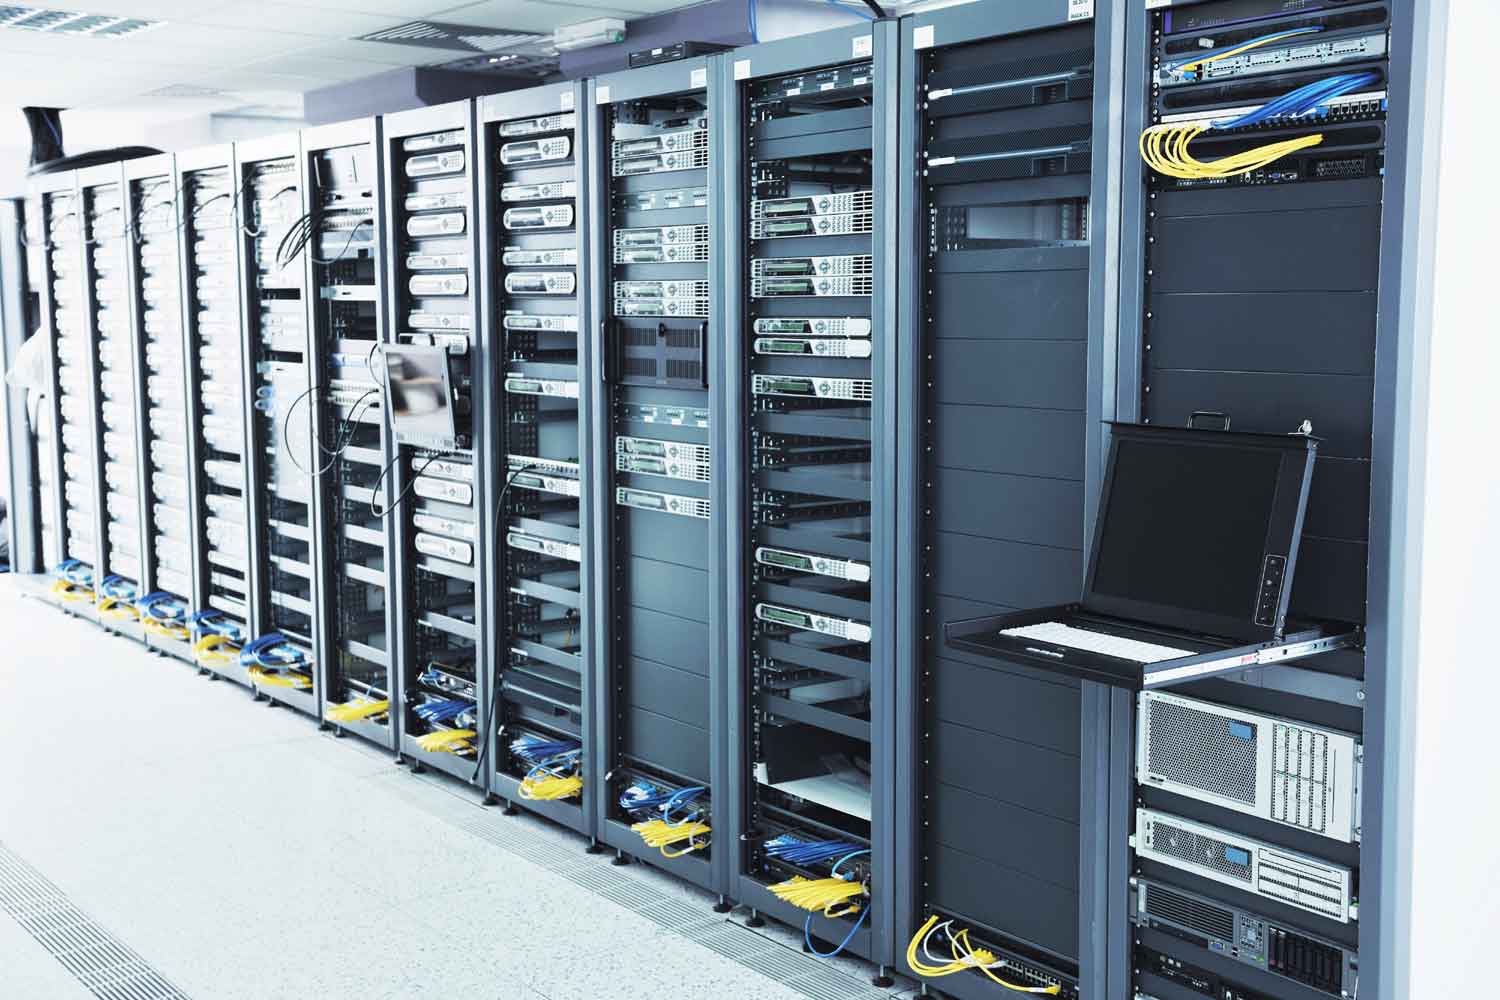 Image of server room with racks of servers cabled in a network enviroment